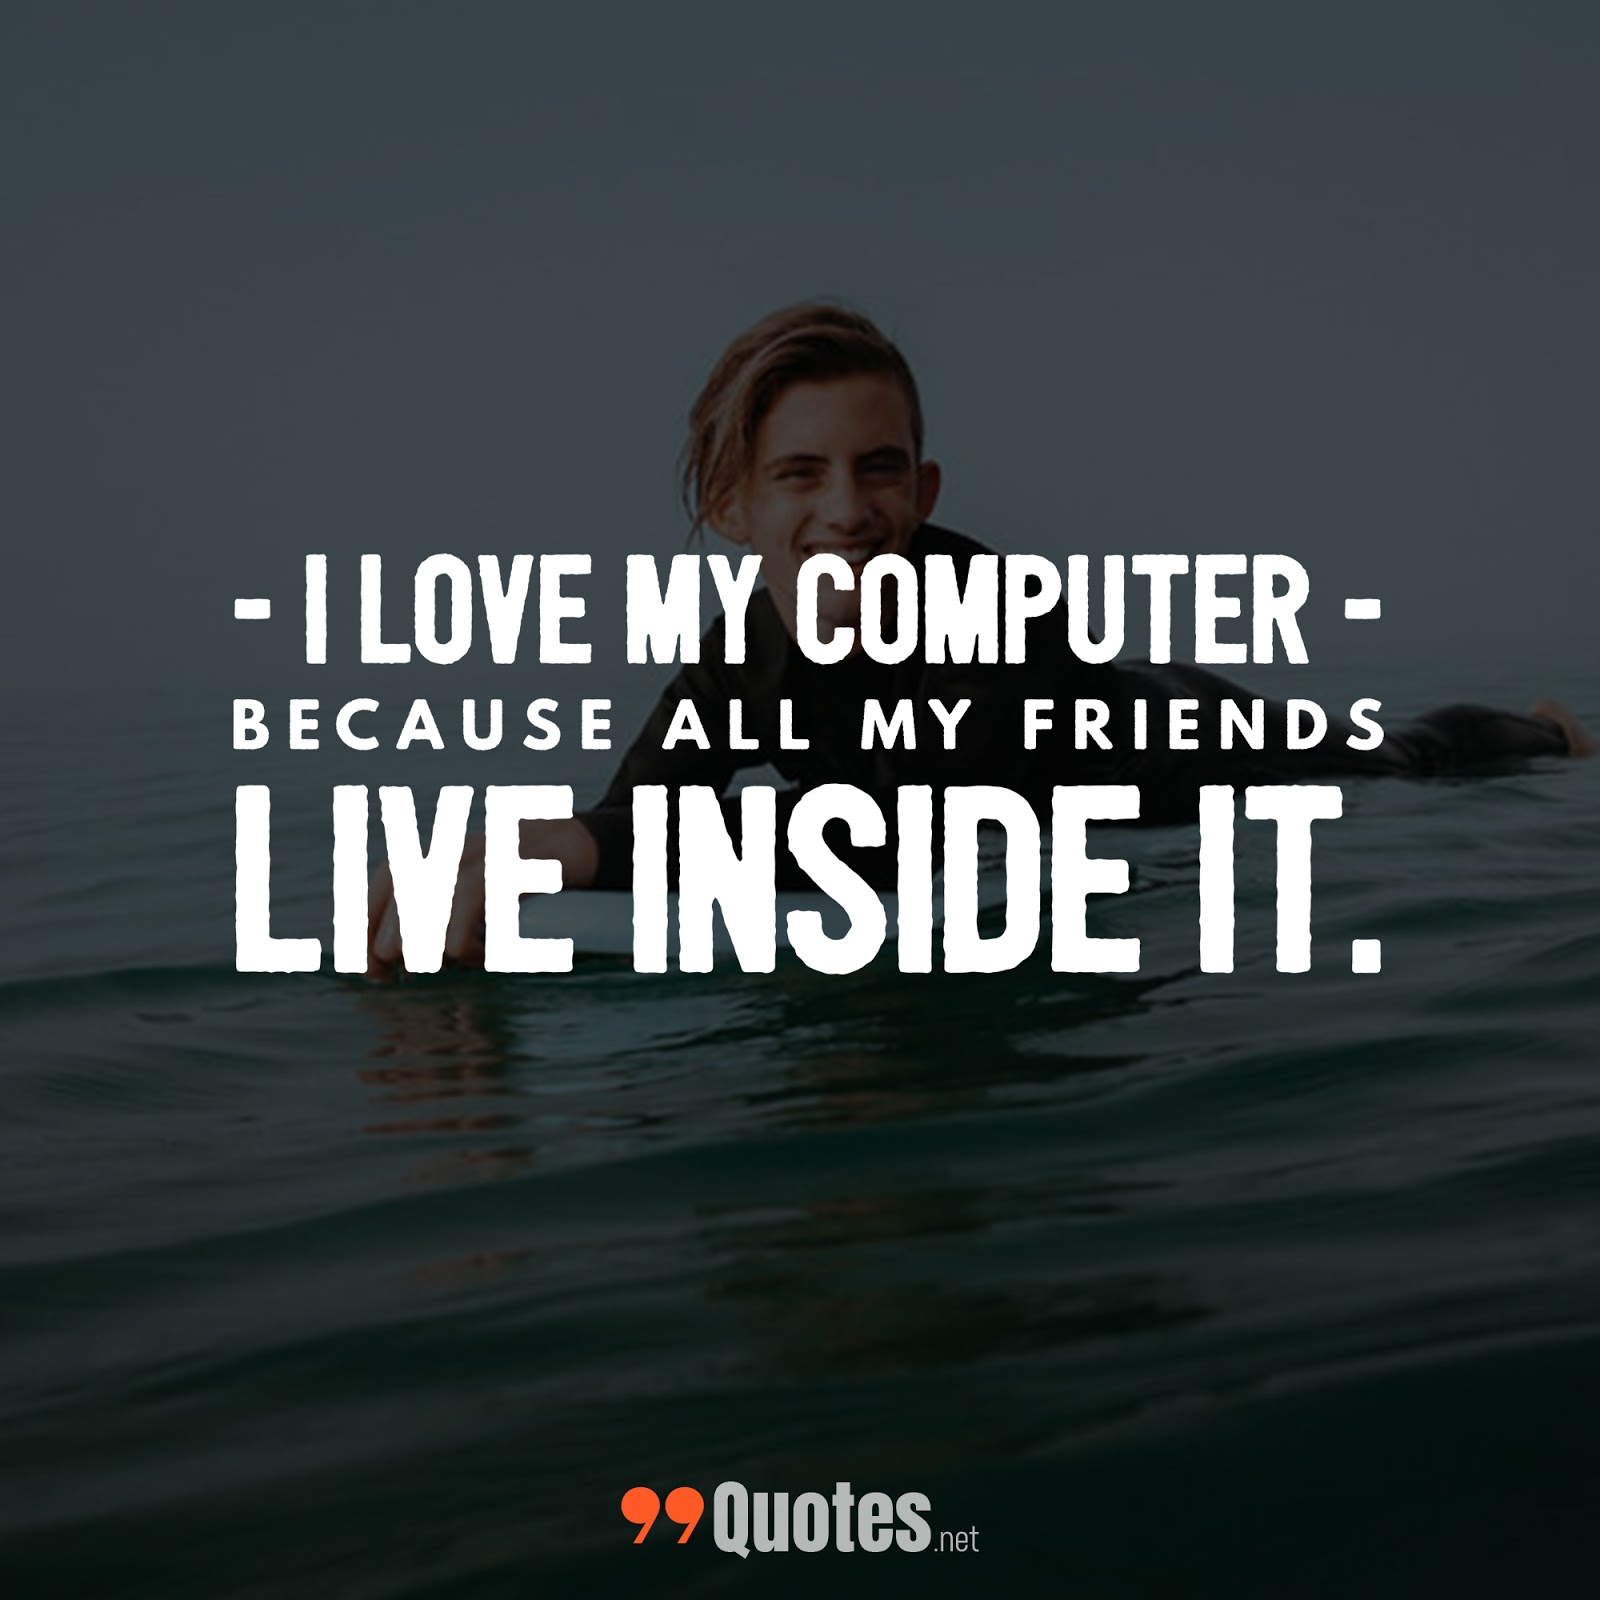 Short my friend. I Love Computer because all of my friends Live there. I Love my Computer all my friends Live inside it.